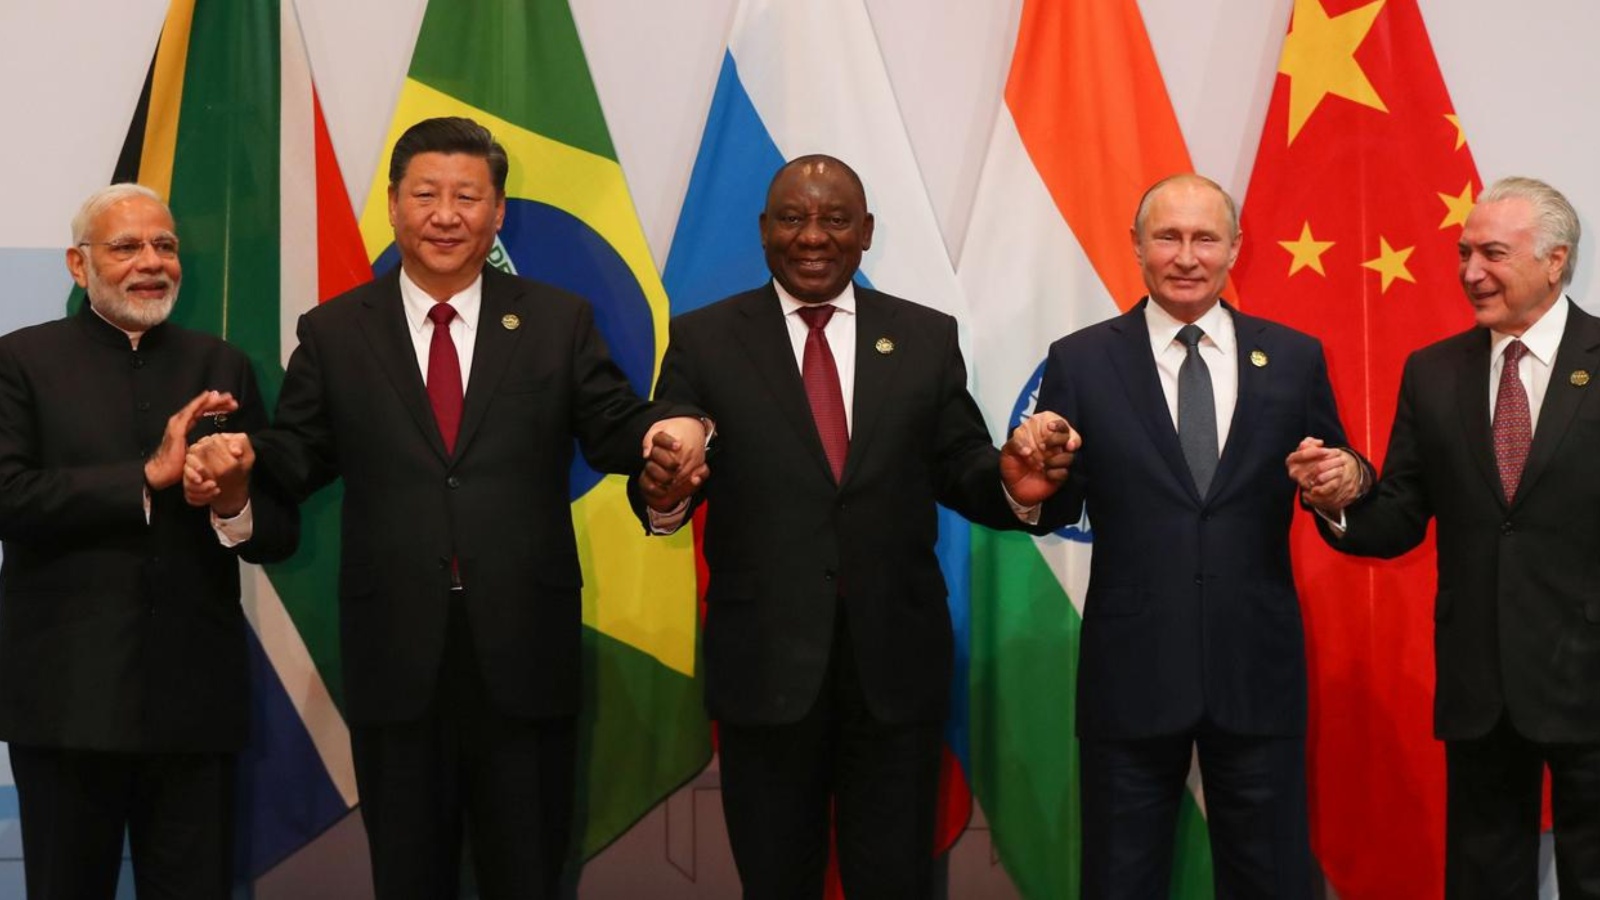 South Africa, Brazil, other BRICS nations adopt new currencies to reduce dollar influence